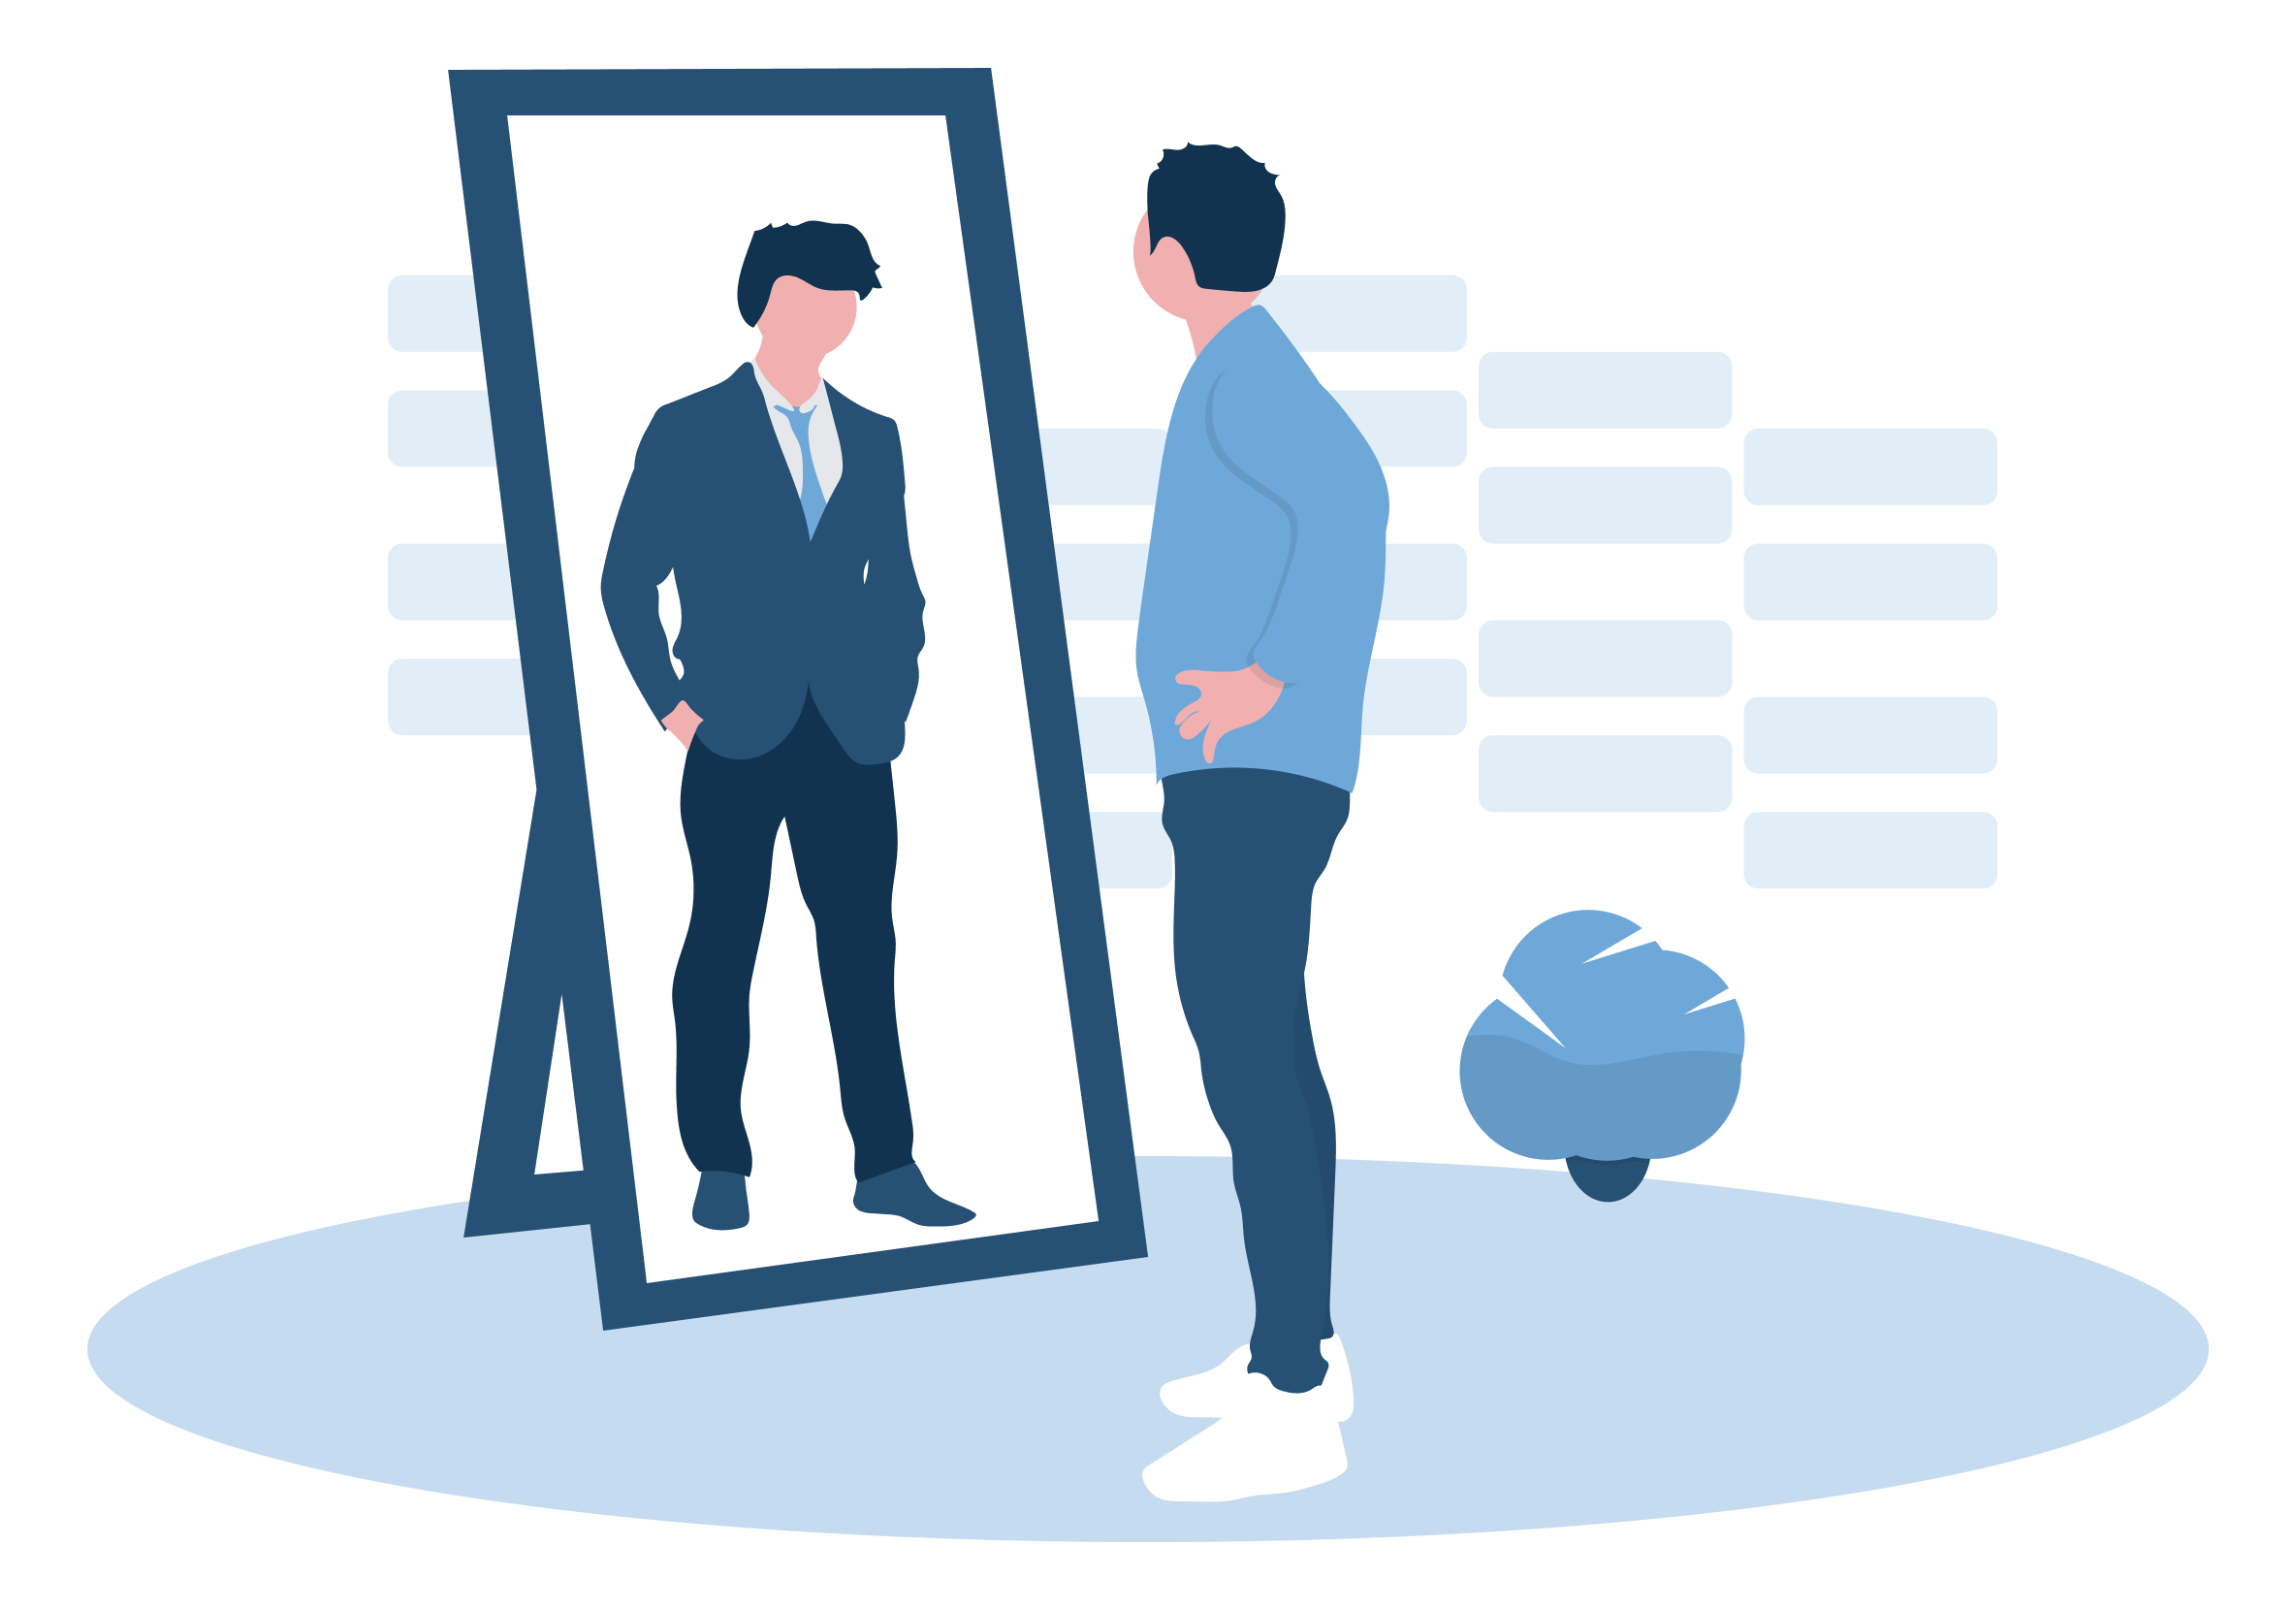 Illustration of a figure in casual clothes looking in a mirror and seeing themselves wearing business attire